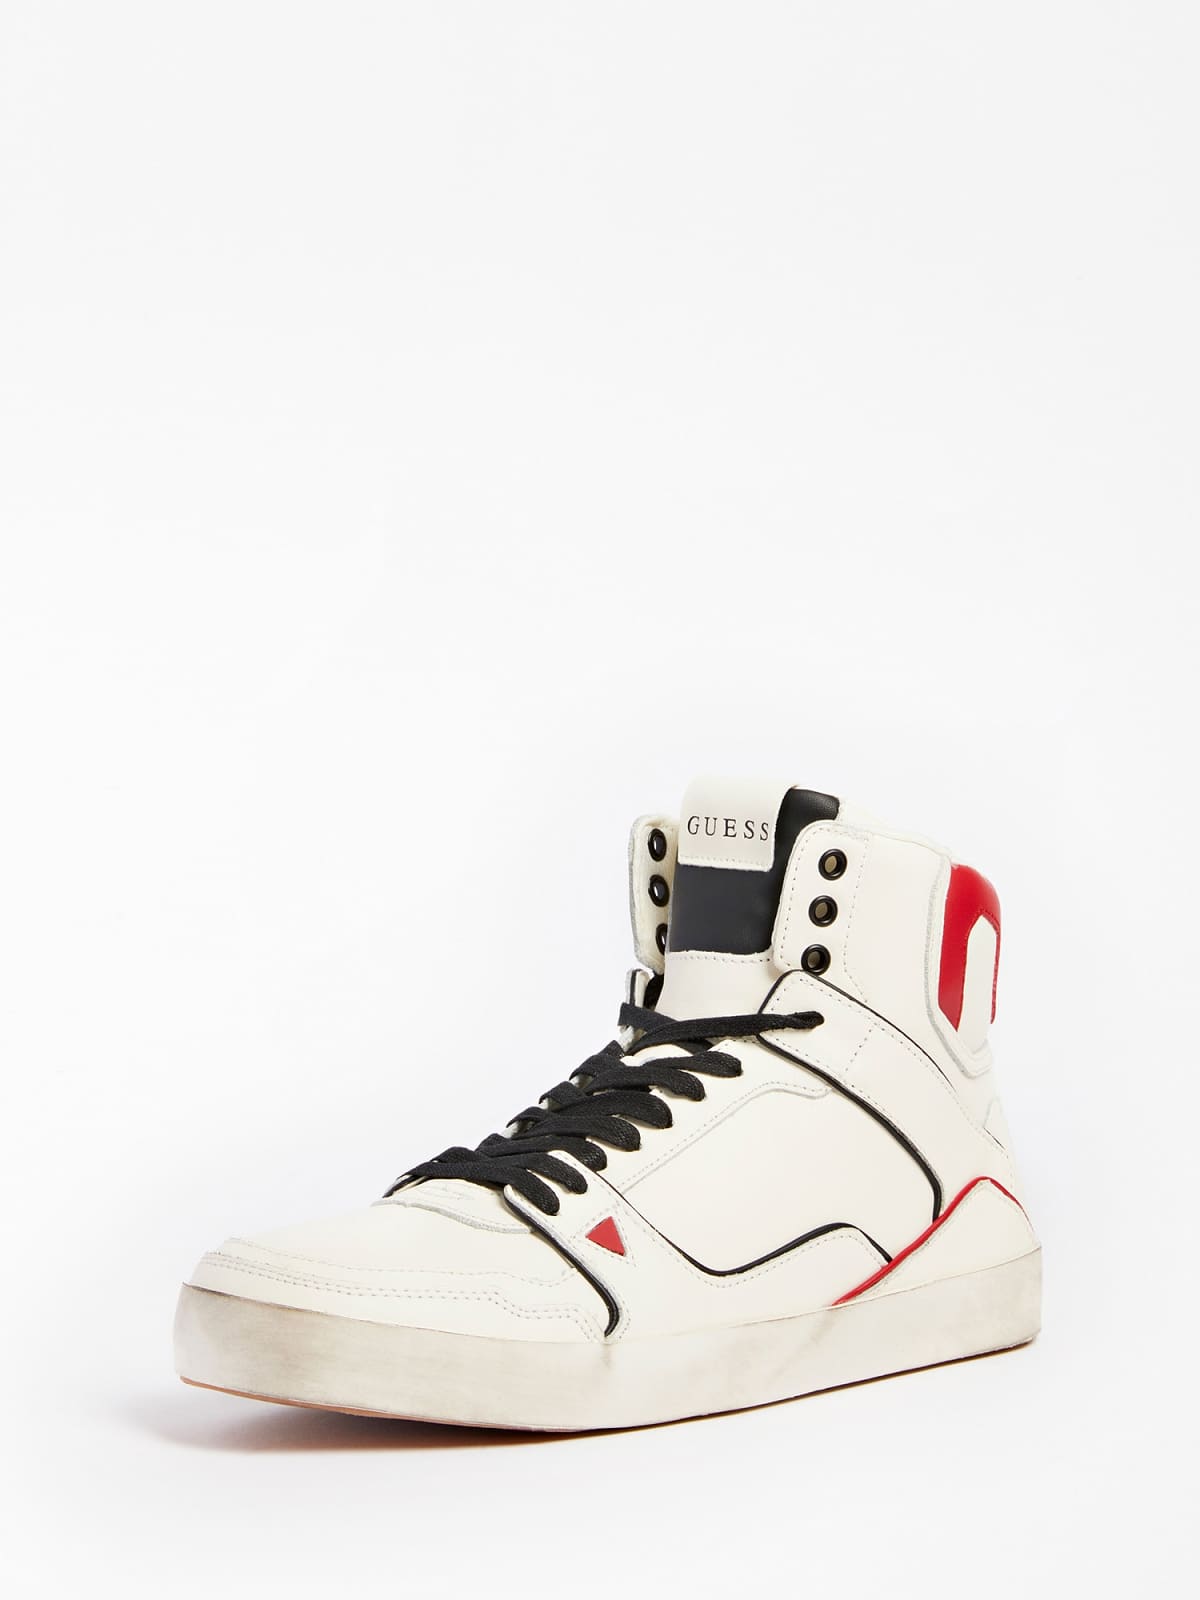 Guess Lodi Special High-Top Sneakers | Rather Saucy